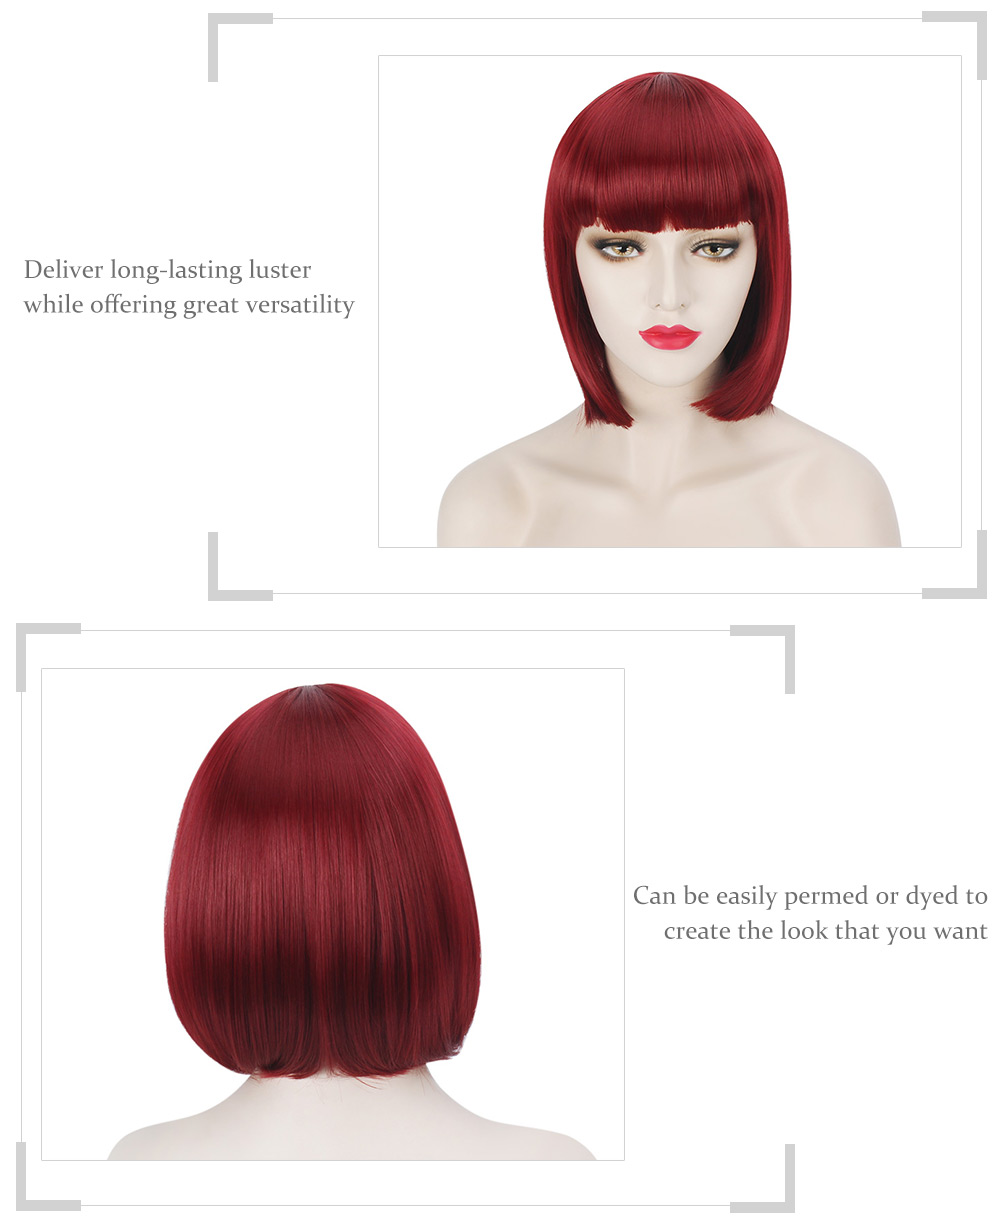 Piaoliujia Glossy Straight Bobo Wigs with Full Bangs for Cosplay Party